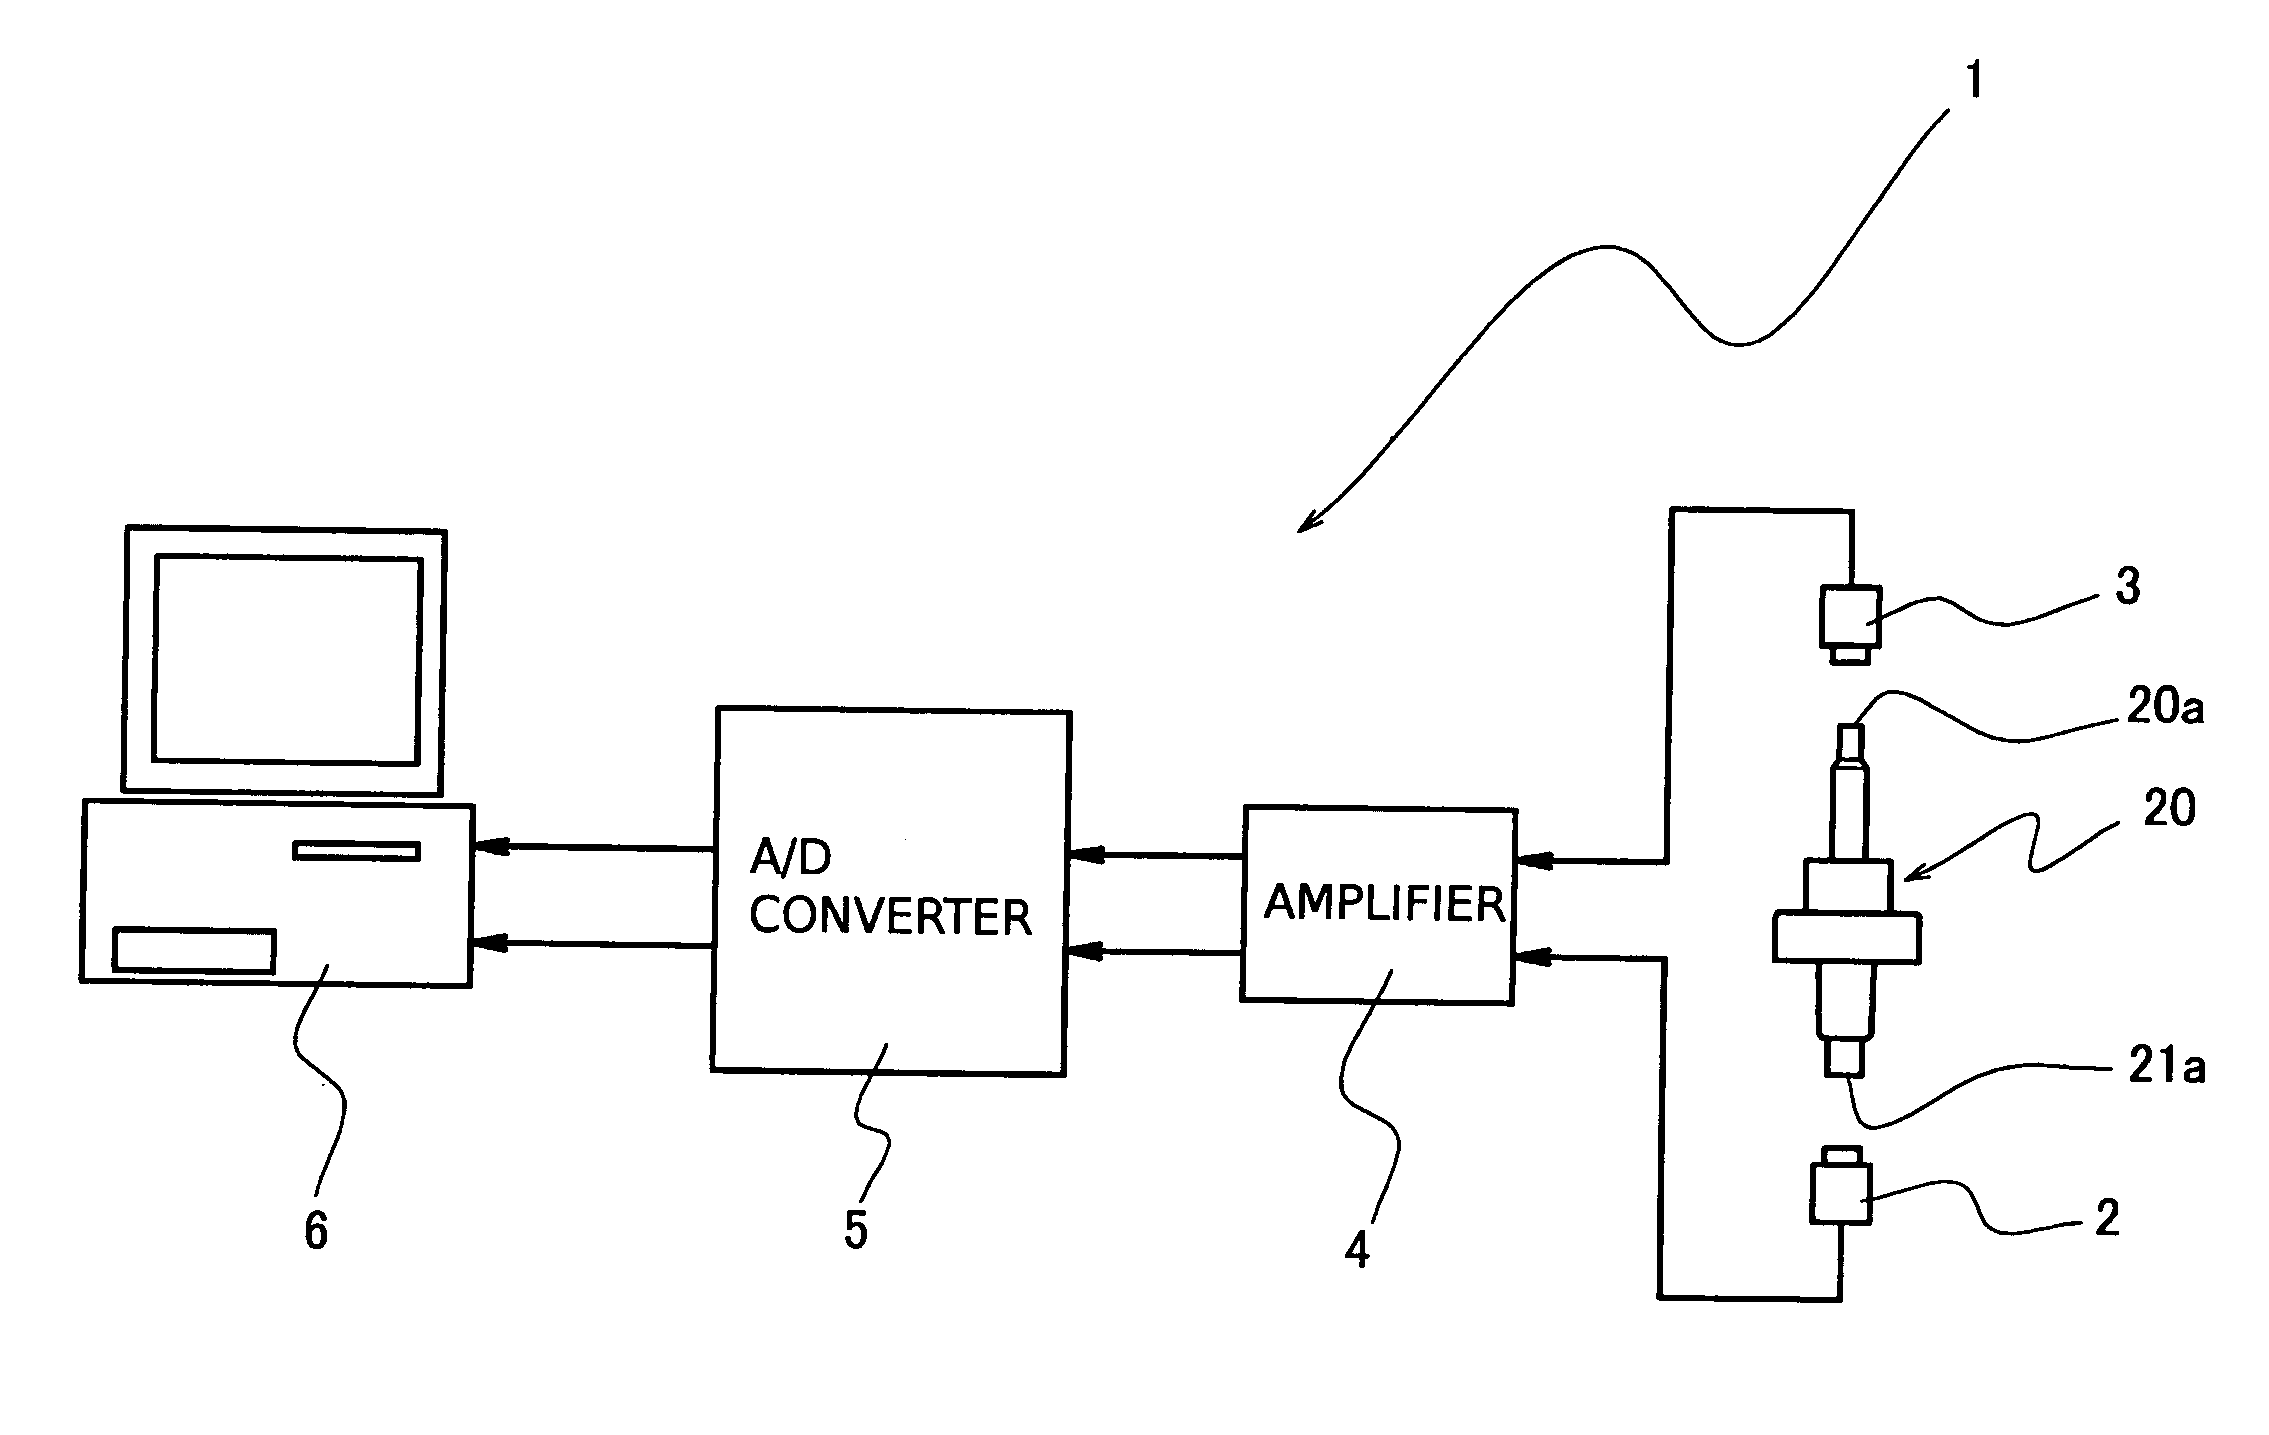 Apparatus and method for inspecting spray pump